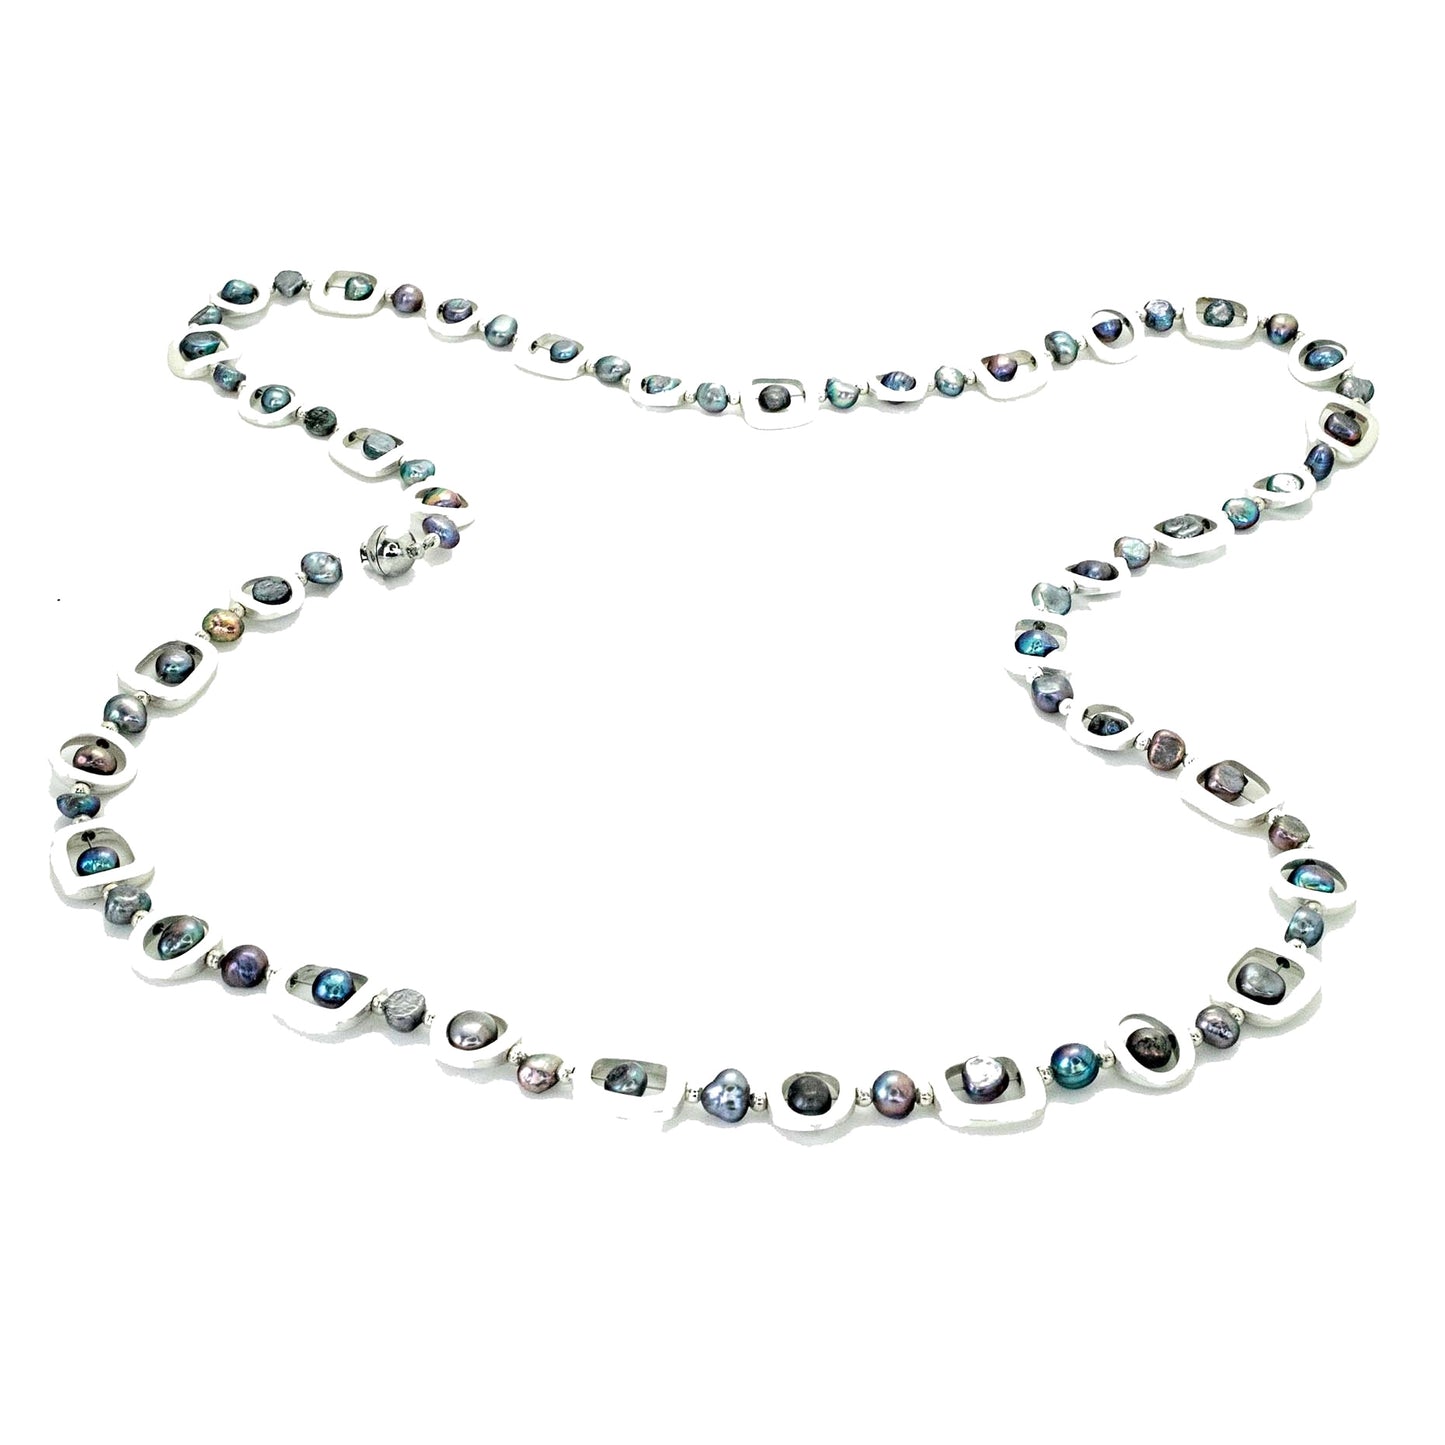 Black fresh water pearls in geometric shape frames making a long necklace with magnetic clasp.